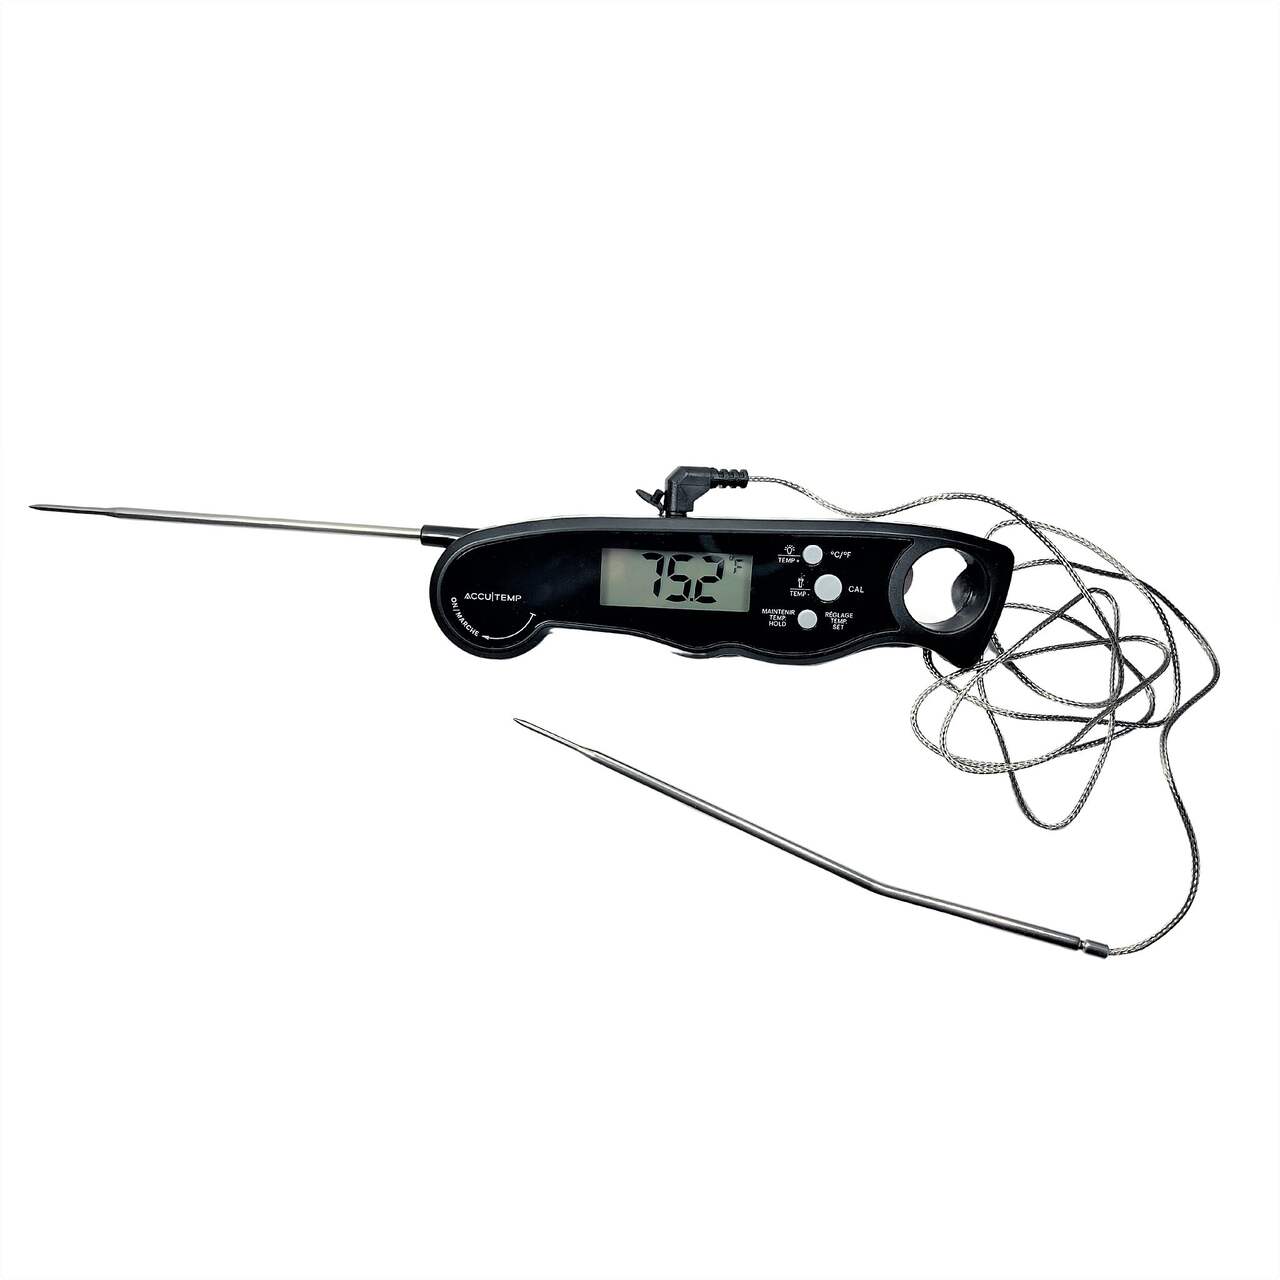 Accutemp 2-in-1 Instant & Probe Digital Thermometer